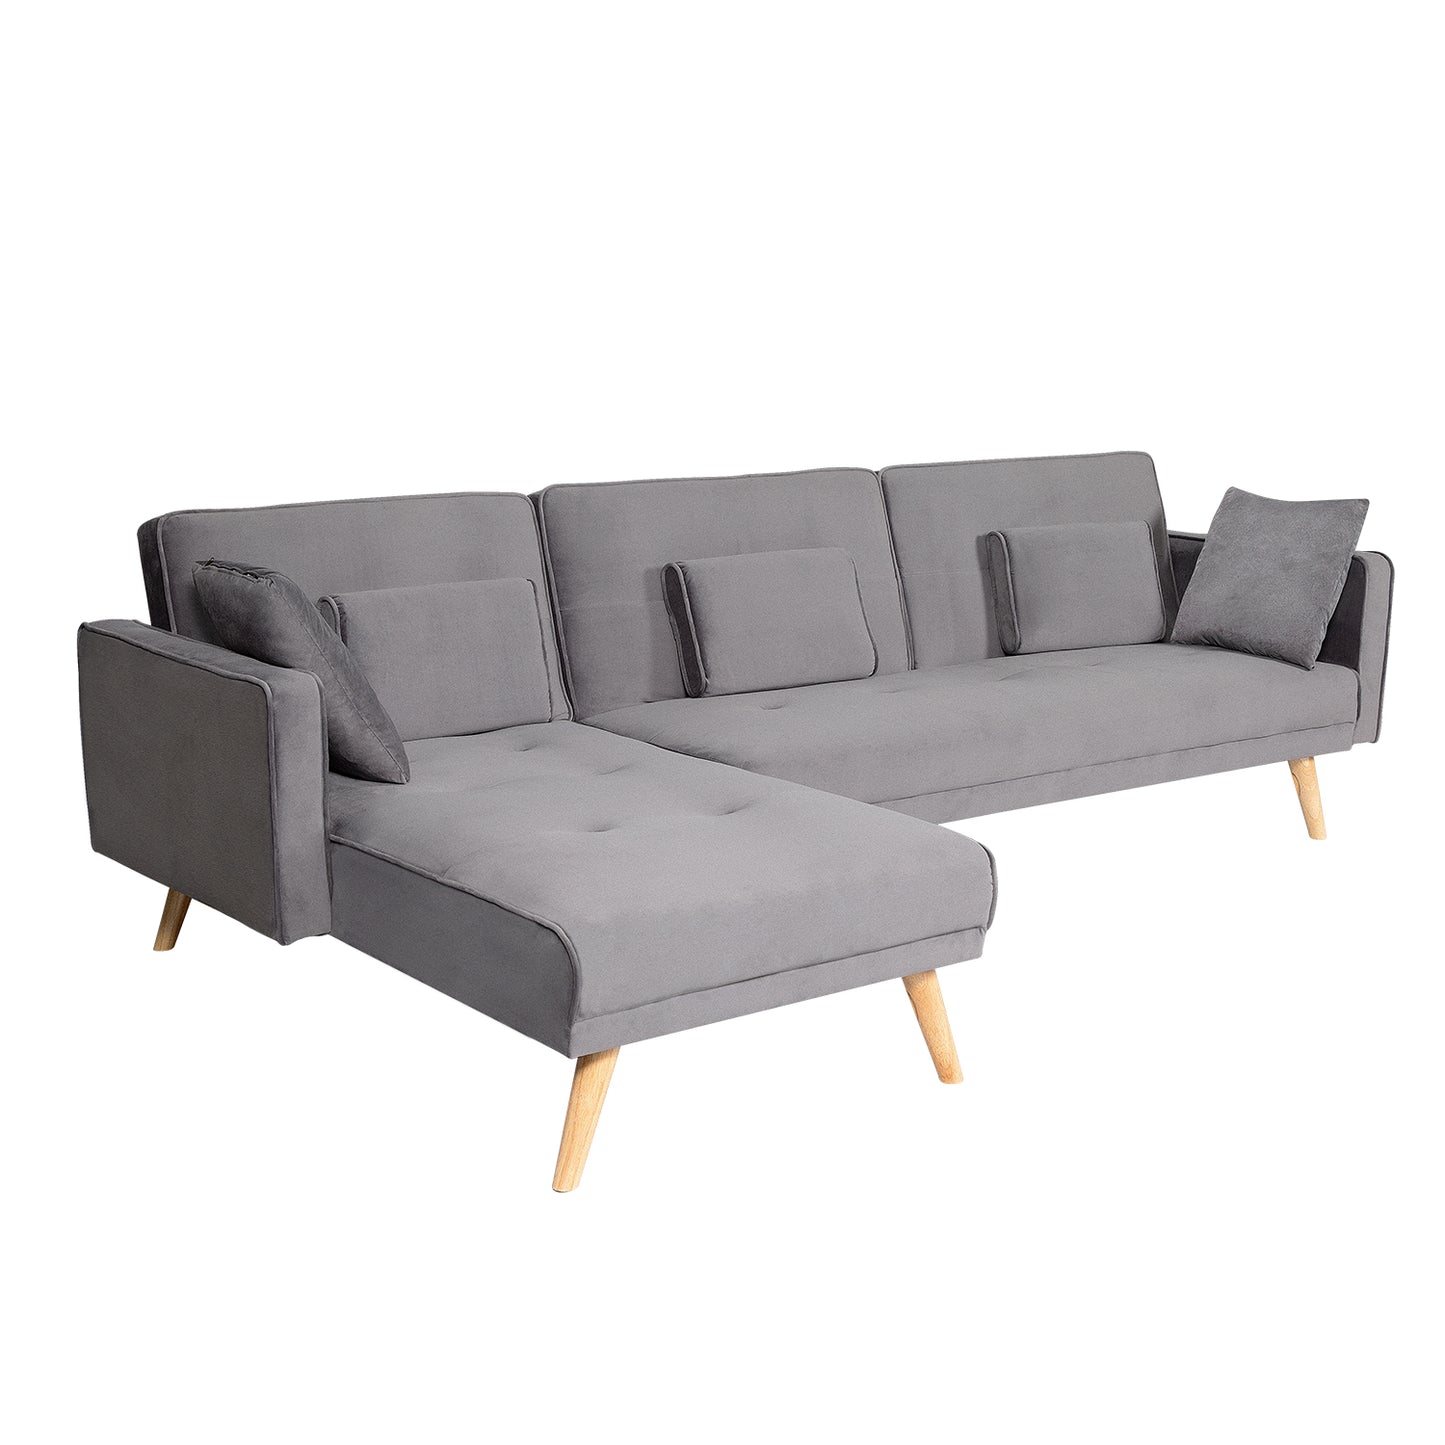 Variable bed sofa living room folding sofa,right noble concubine